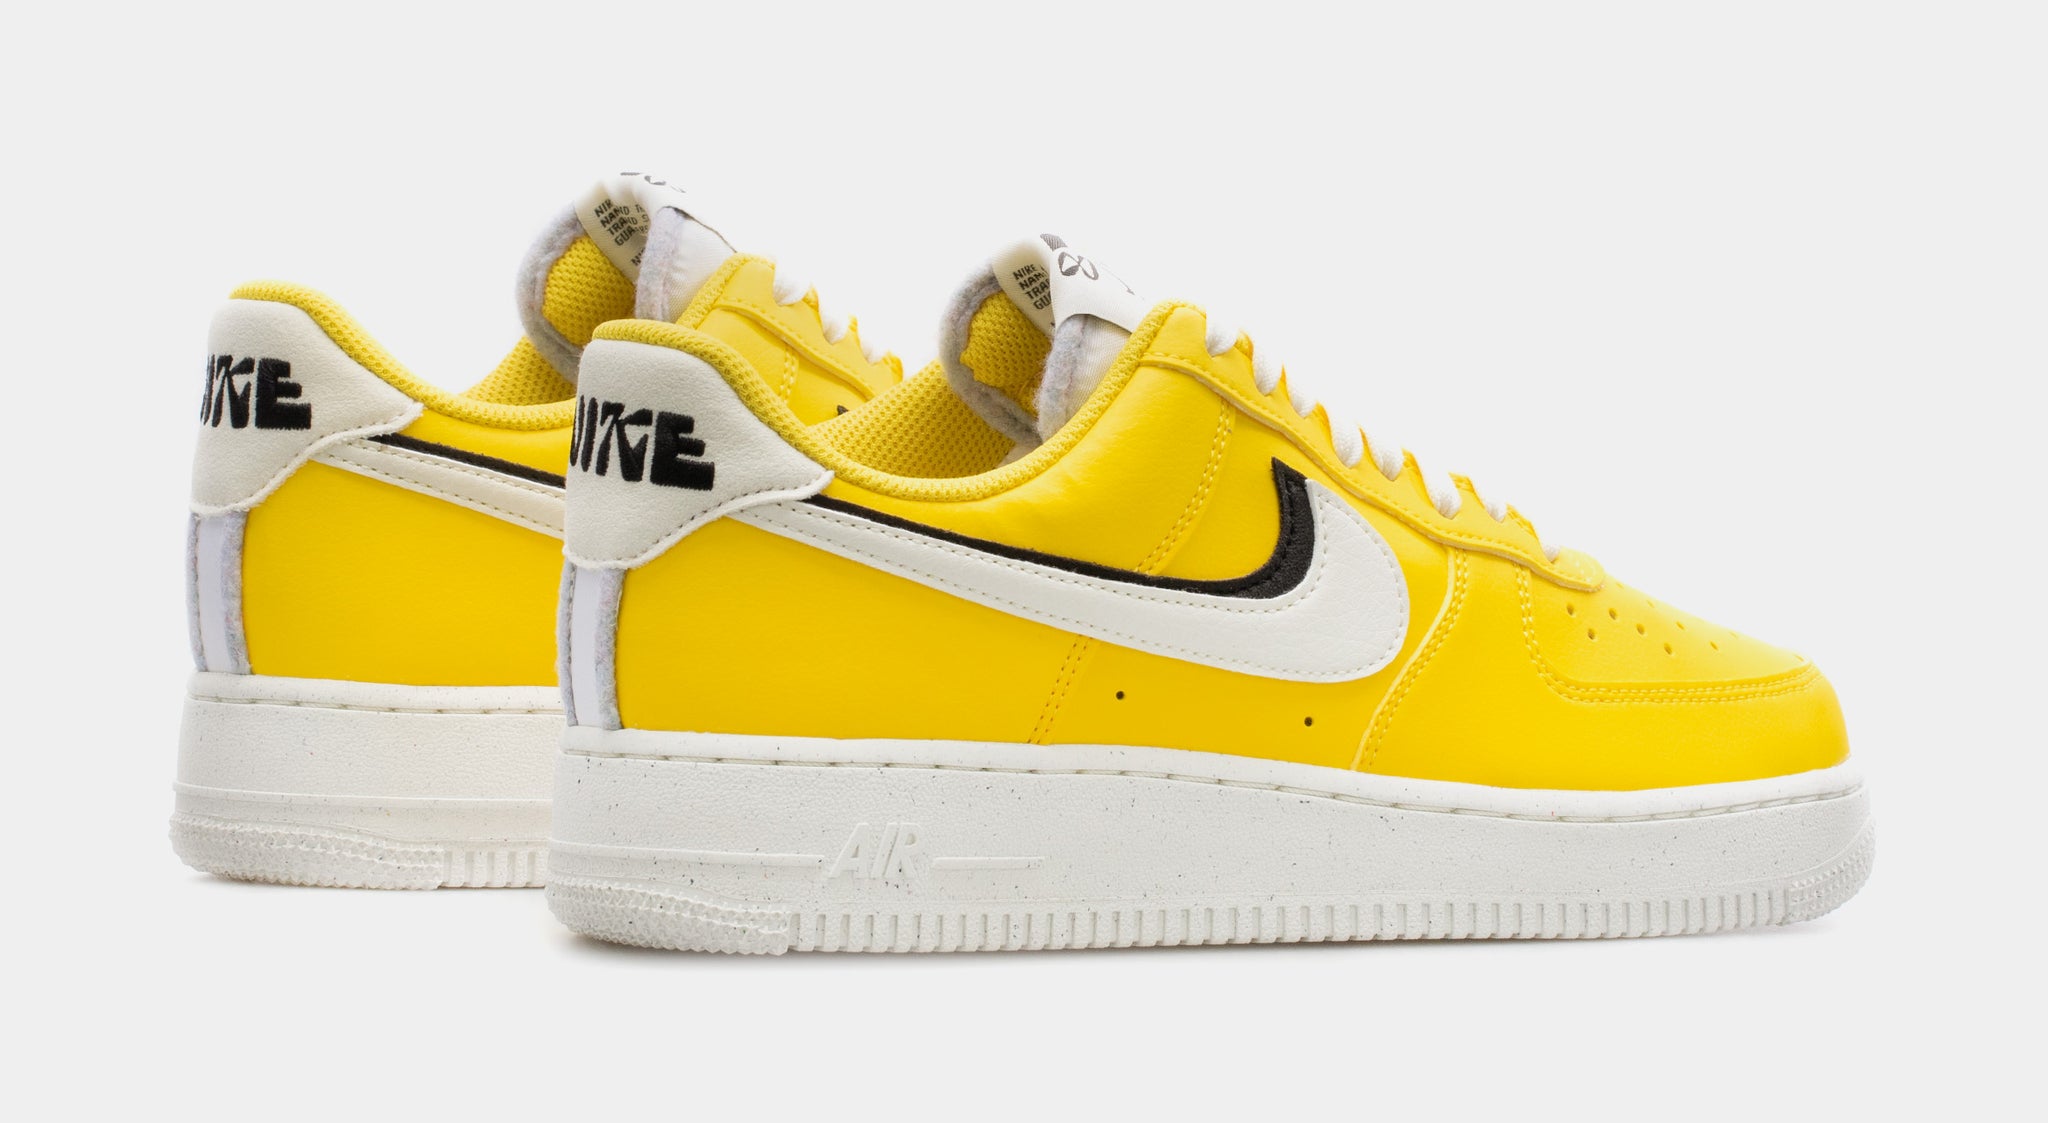 Nike Air Force 1 Low 82 Mens Lifestyle Shoes Yellow DO9786-700 – Shoe Palace